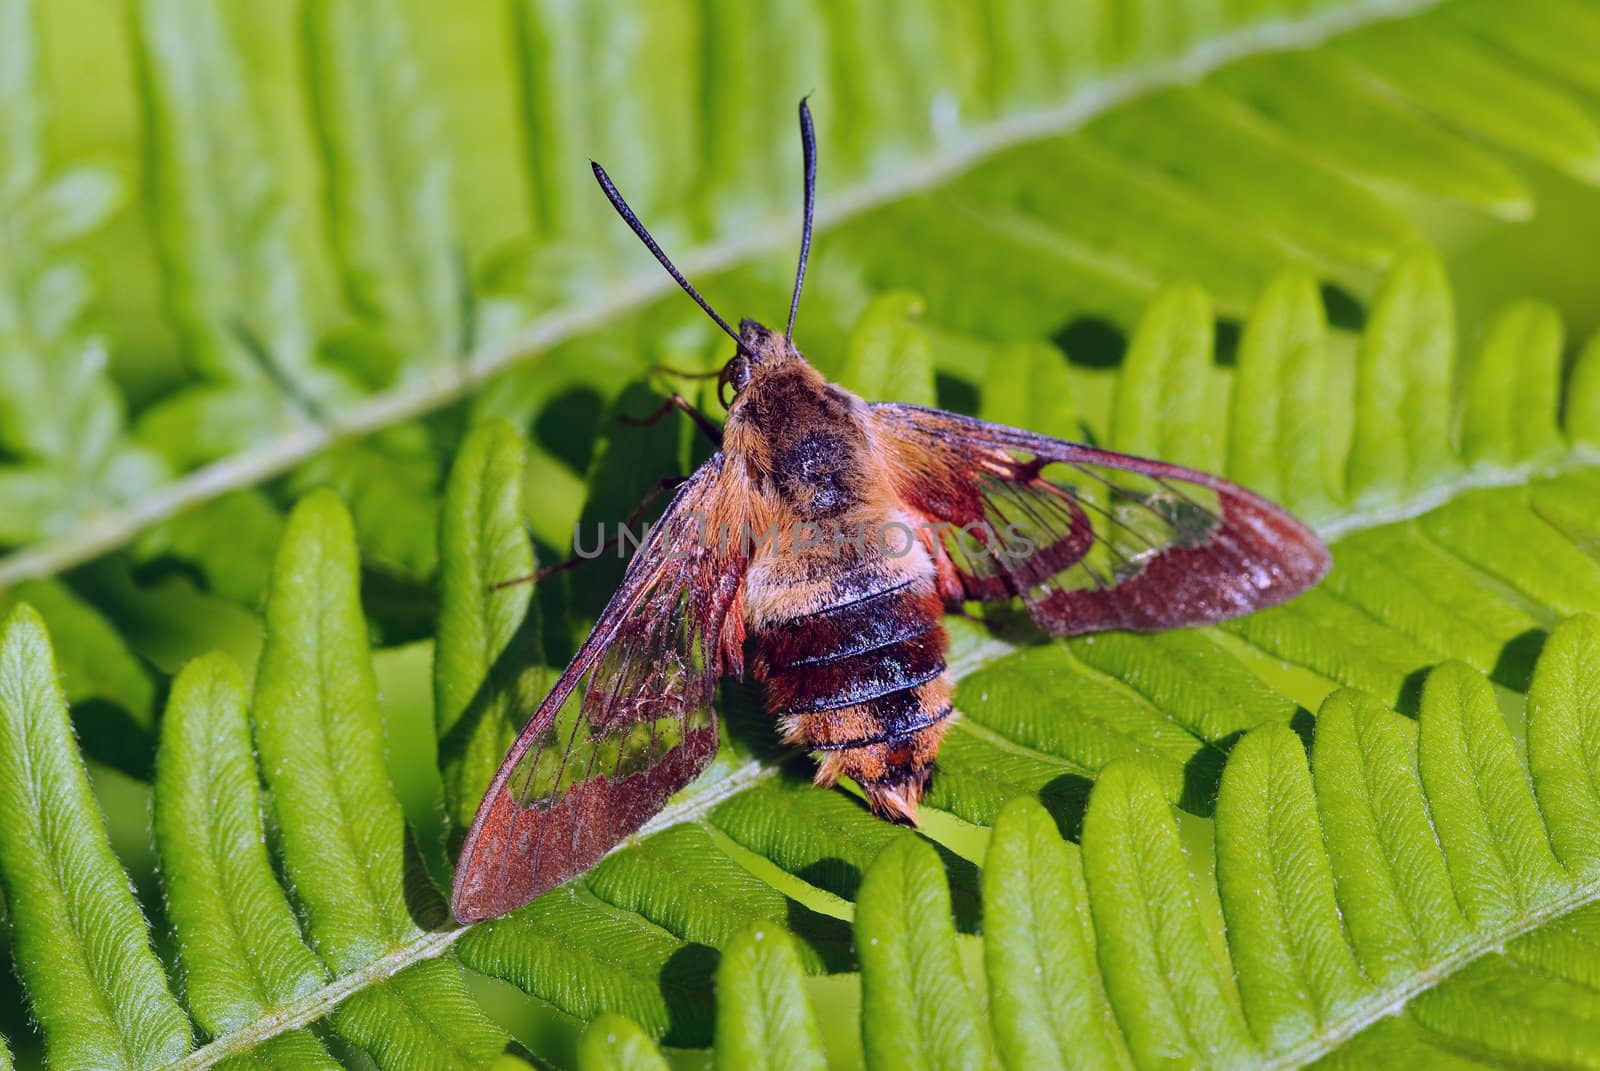 Closeup picture of a moth of a green fern